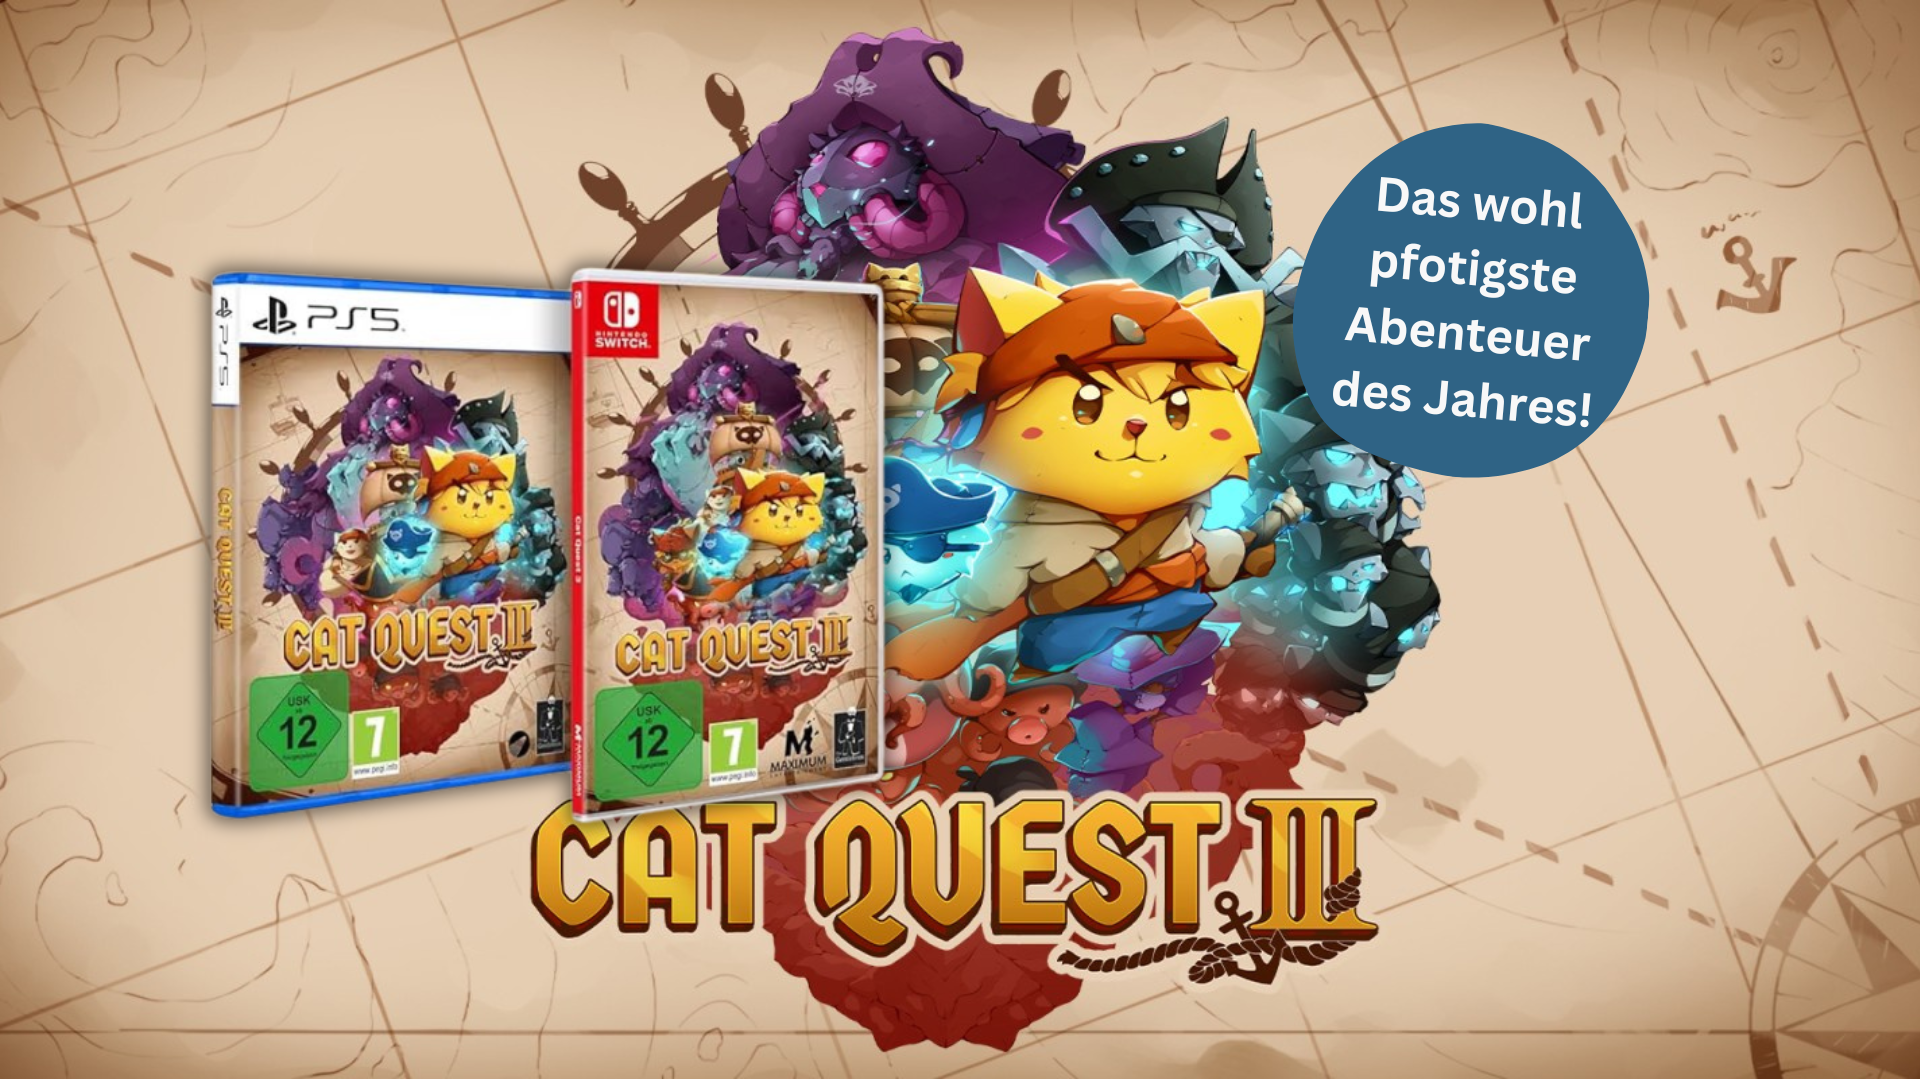 Katzitini ahoy!  Now “Cat Quest III” for Nintendo Switch and